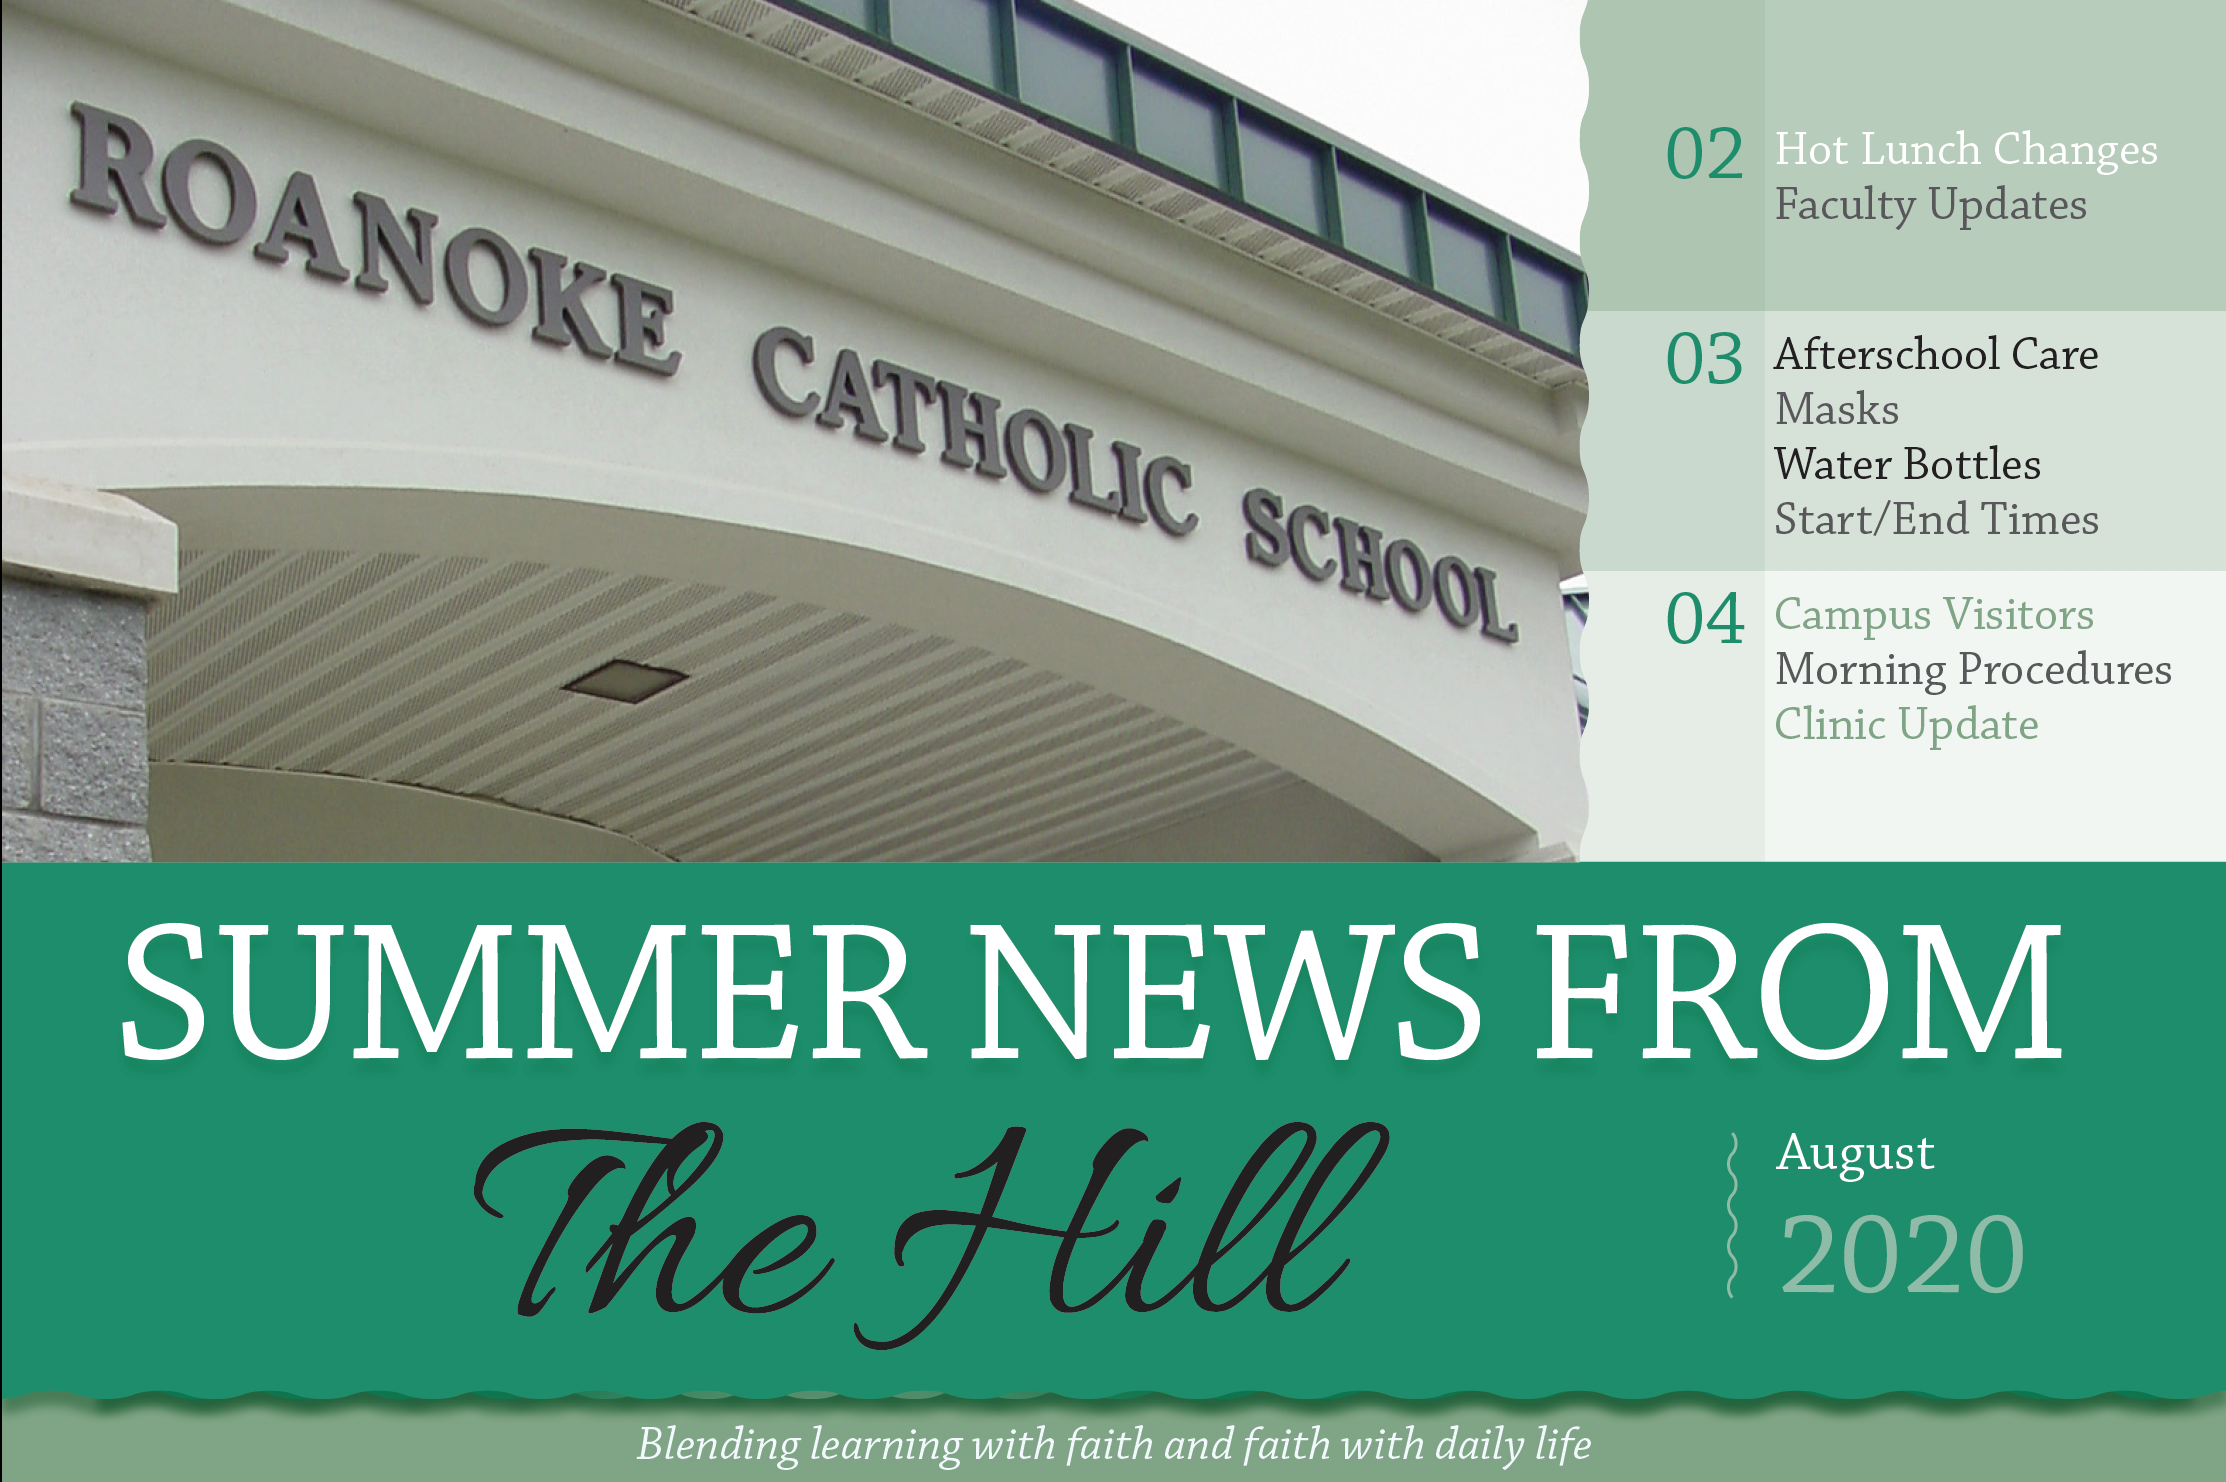 Summer 2020 Newsletter is Now Available!